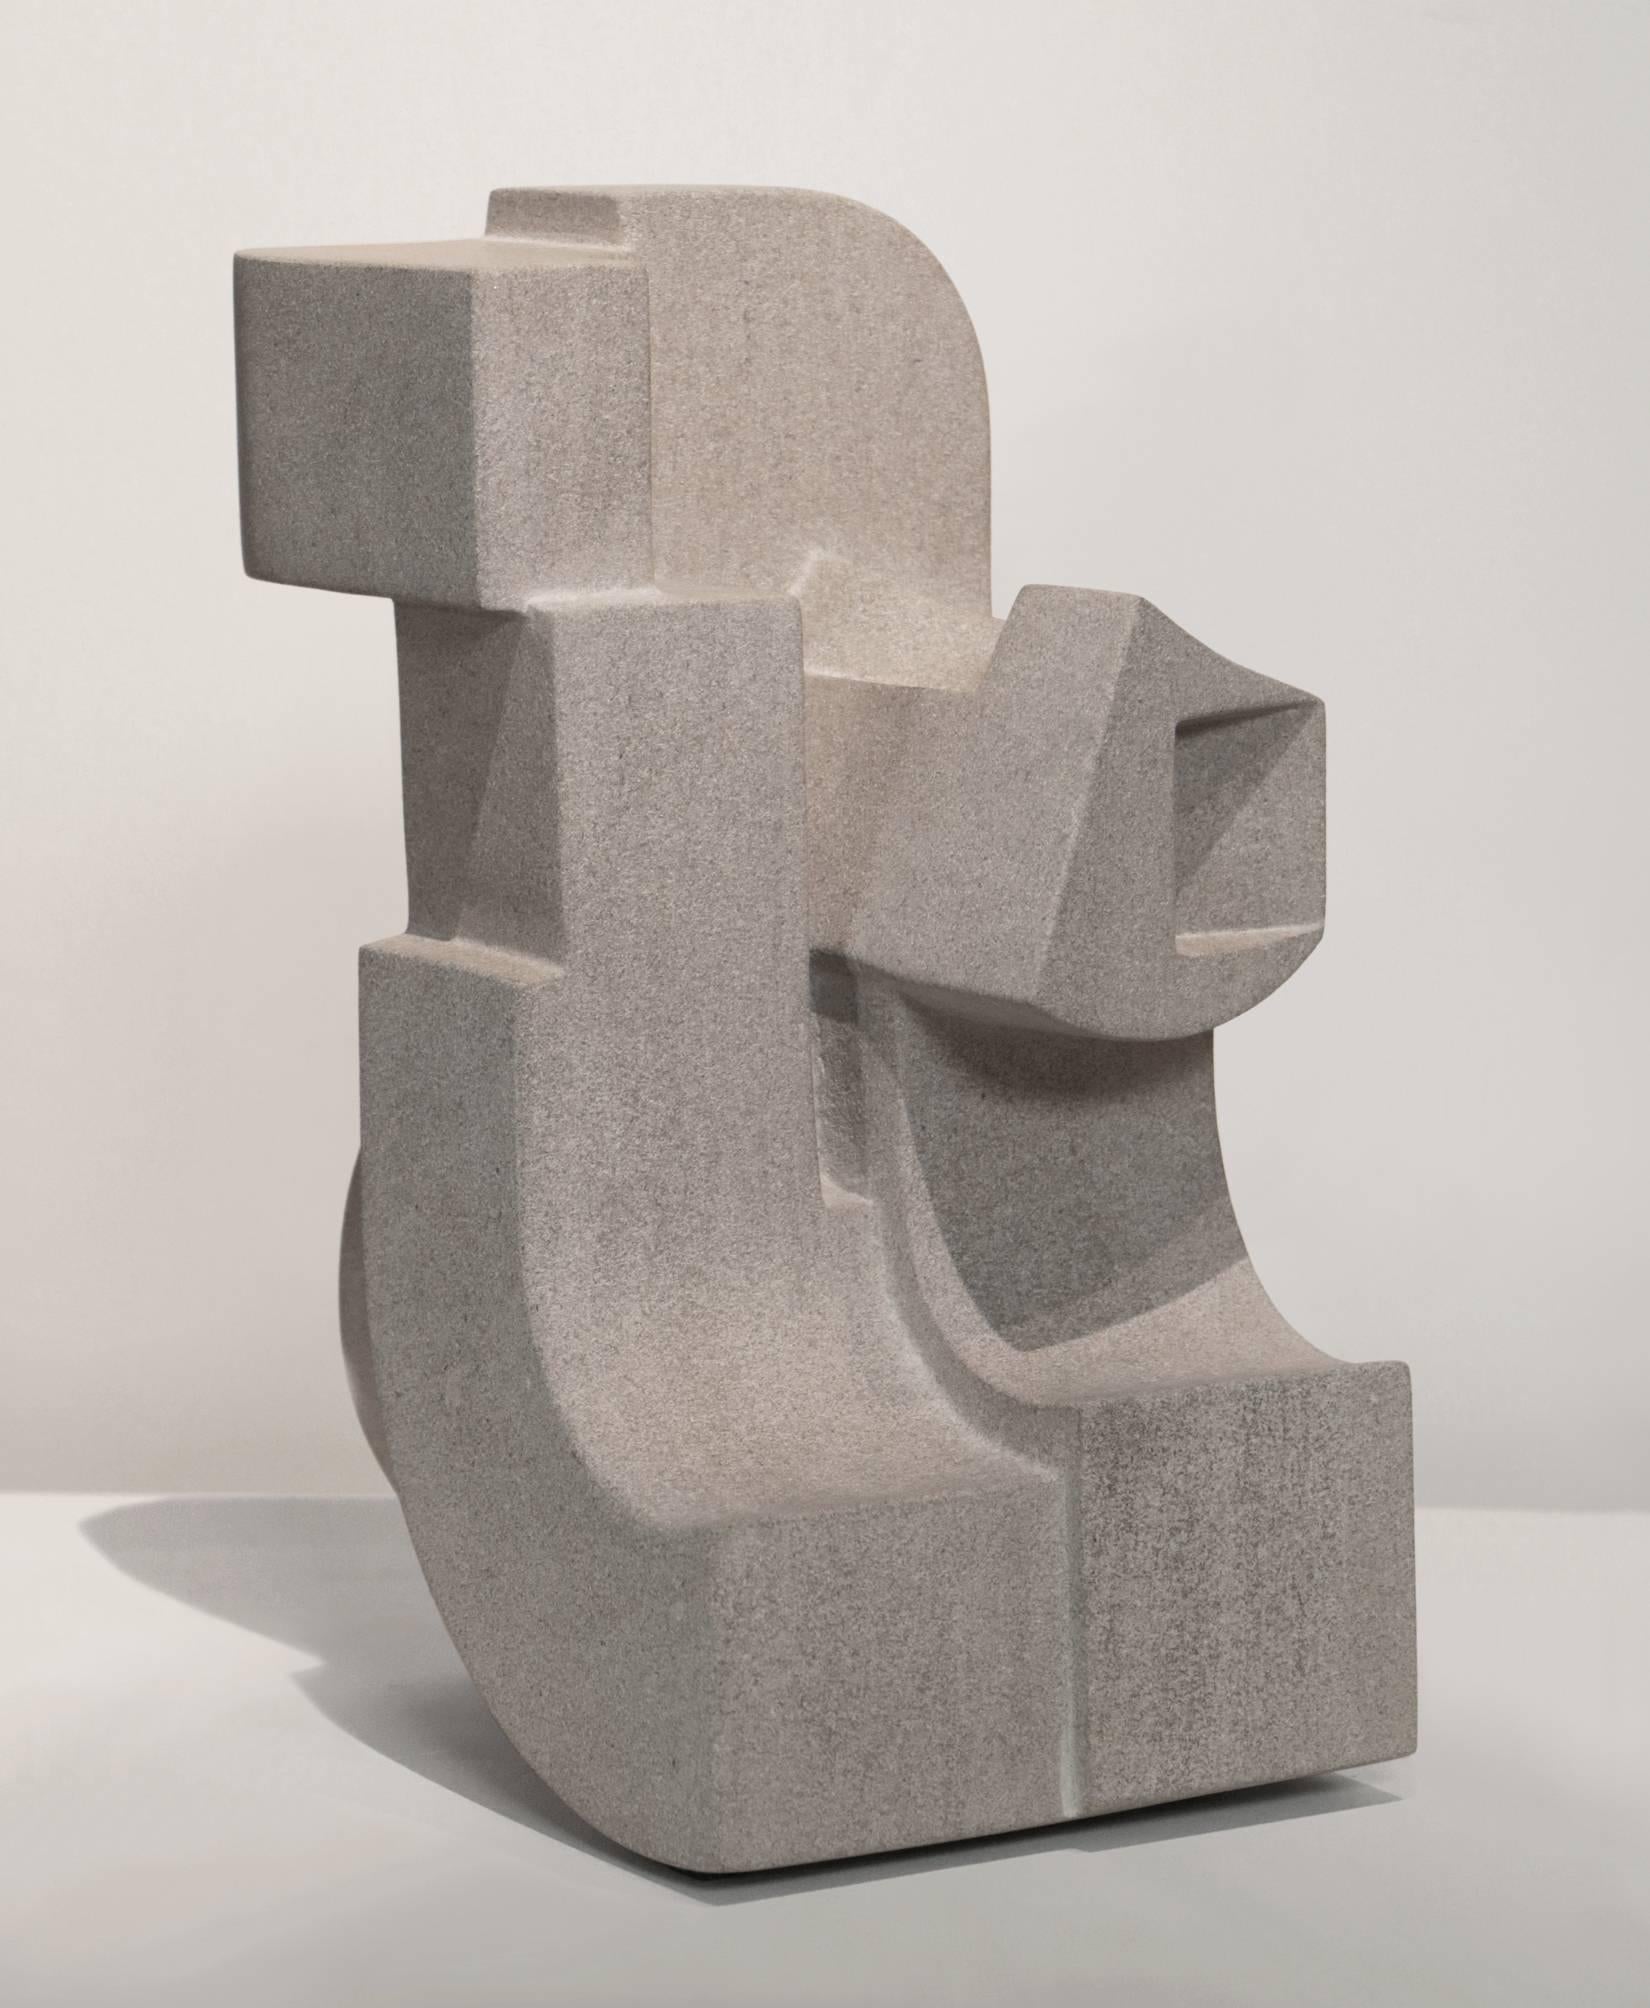 Unique pedestal sculpture hand-carved from Indiana Limestone.

Jeff Metz creates abstract sculptures from a single block of limestone with a mix of pre-meditated and spontaneous actions. He uses both pneumatic and hand tools to achieve his unique